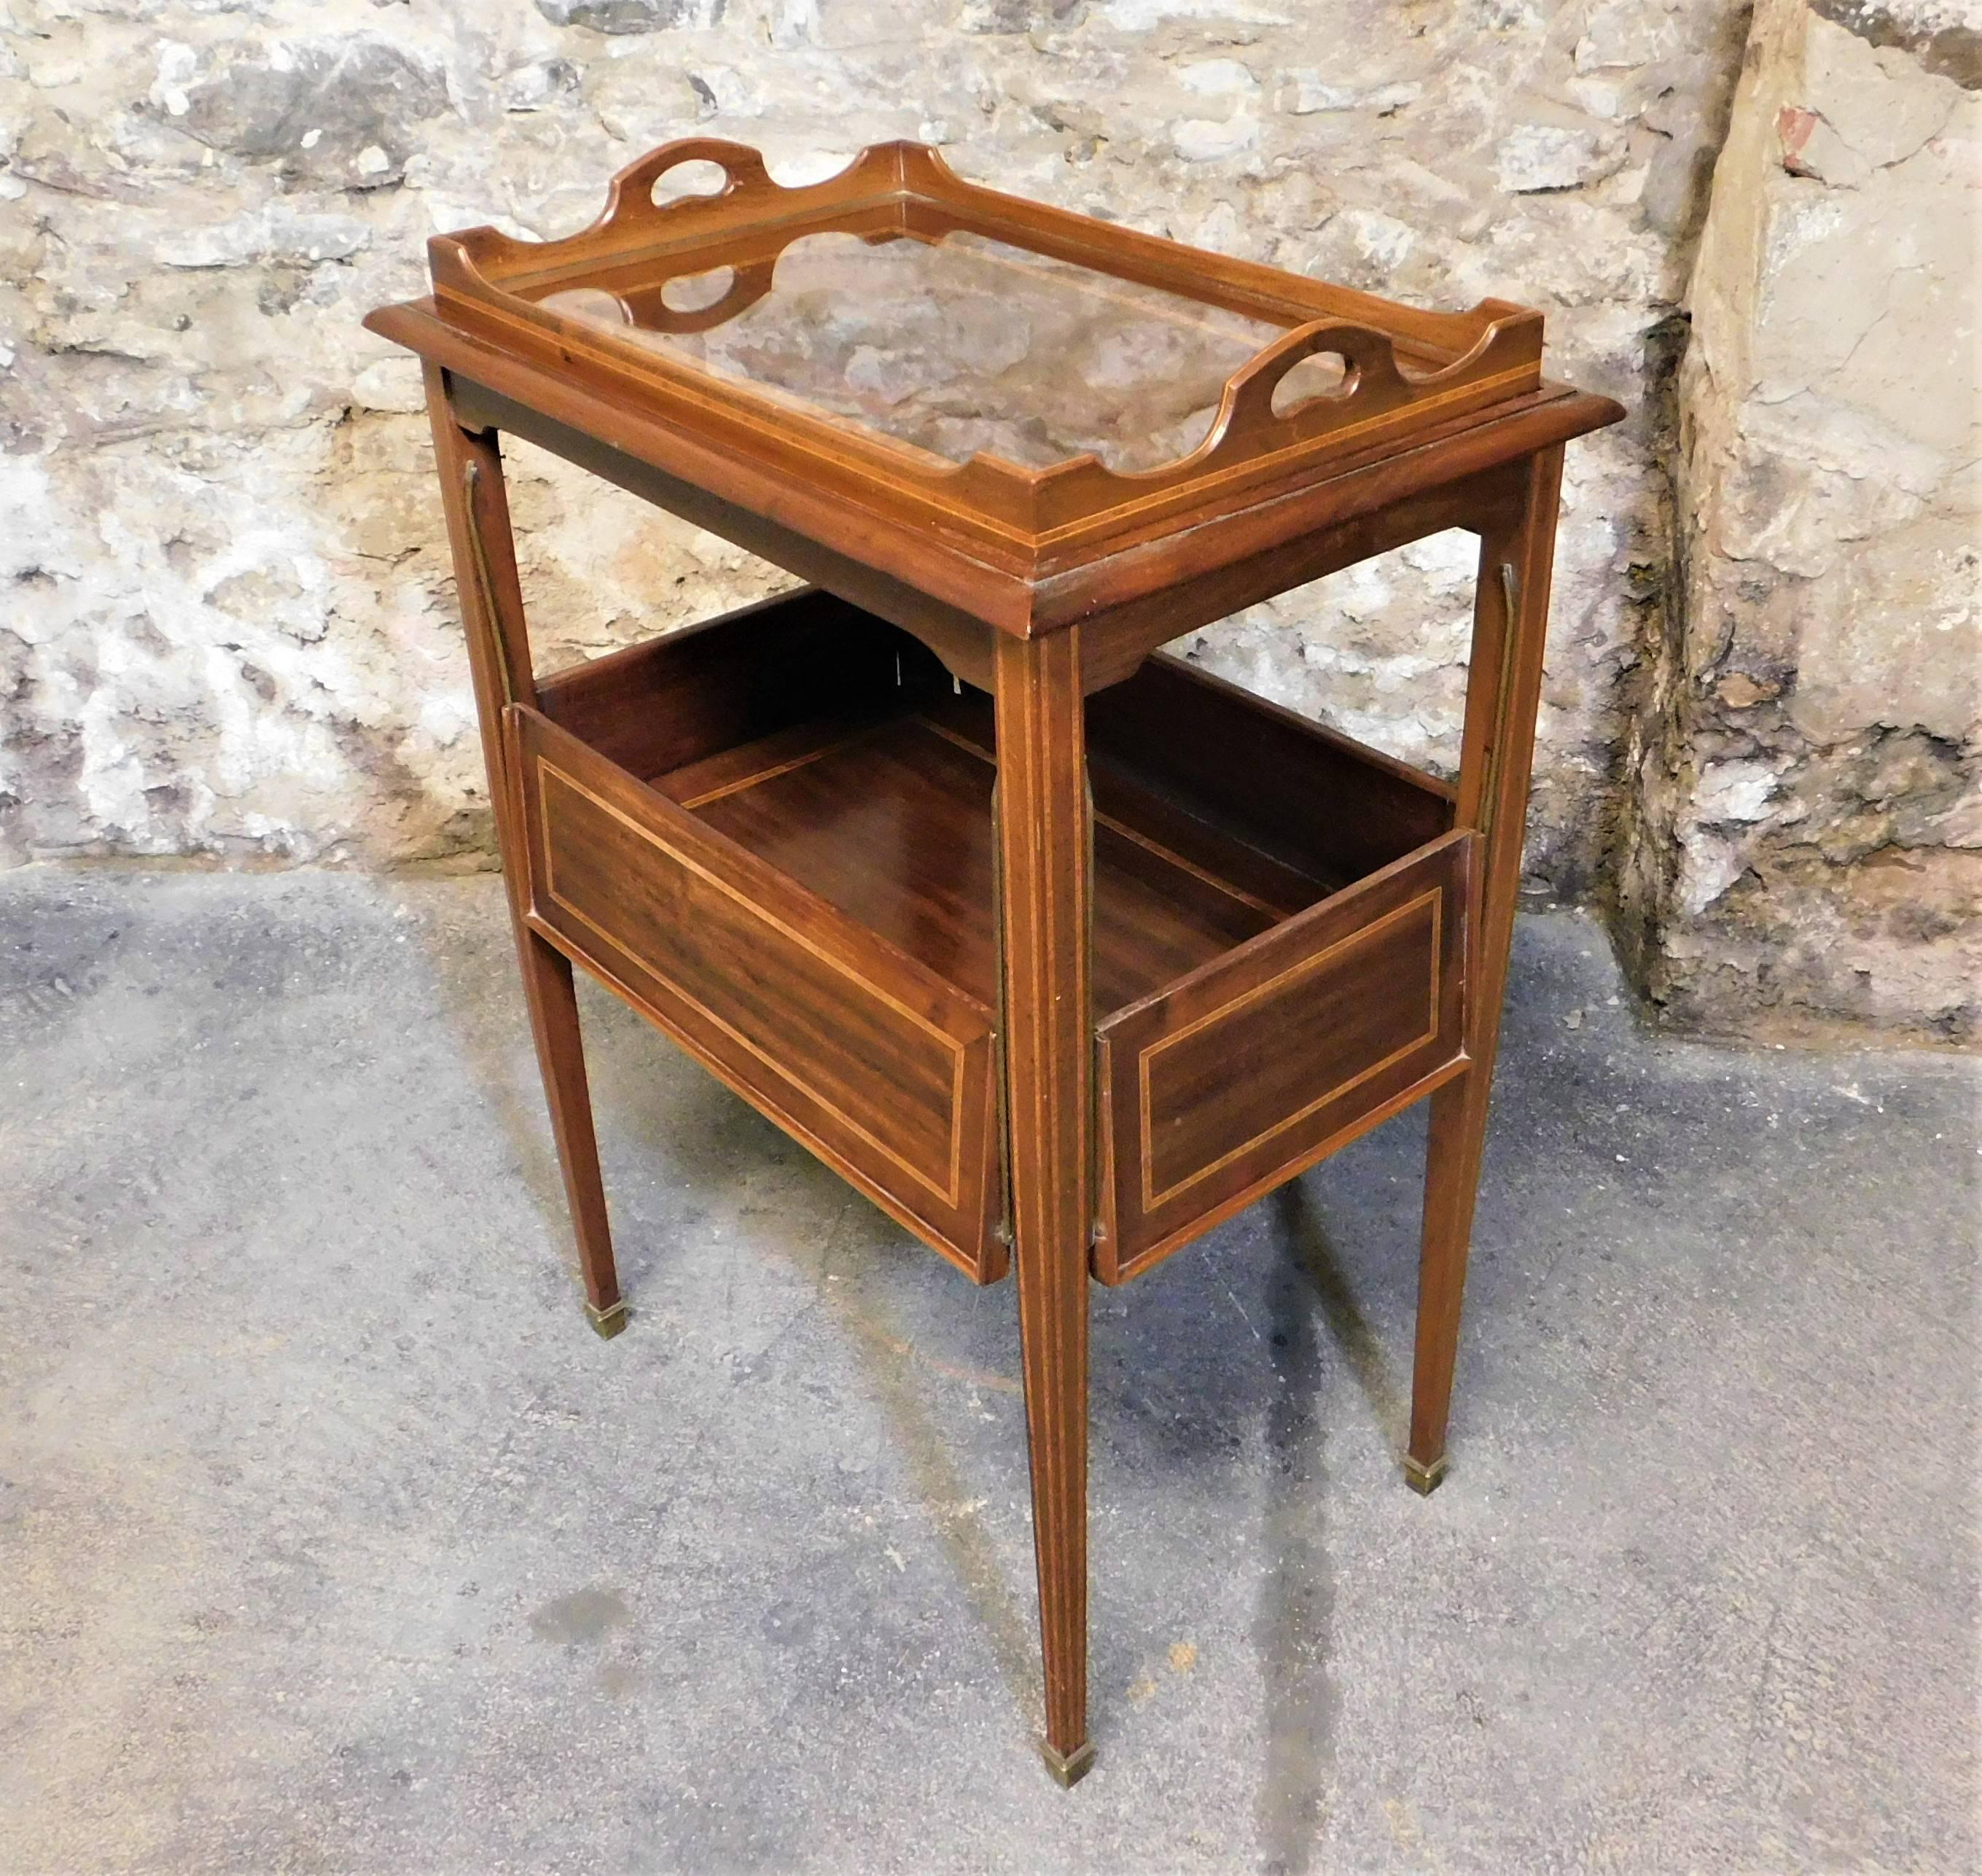 This very unique circa 1920s cocktail drink stand or tea table is made with crossbanded mahogany wood with inlaid lines. Has a glass serving tray that fits on top and the sides drop down.